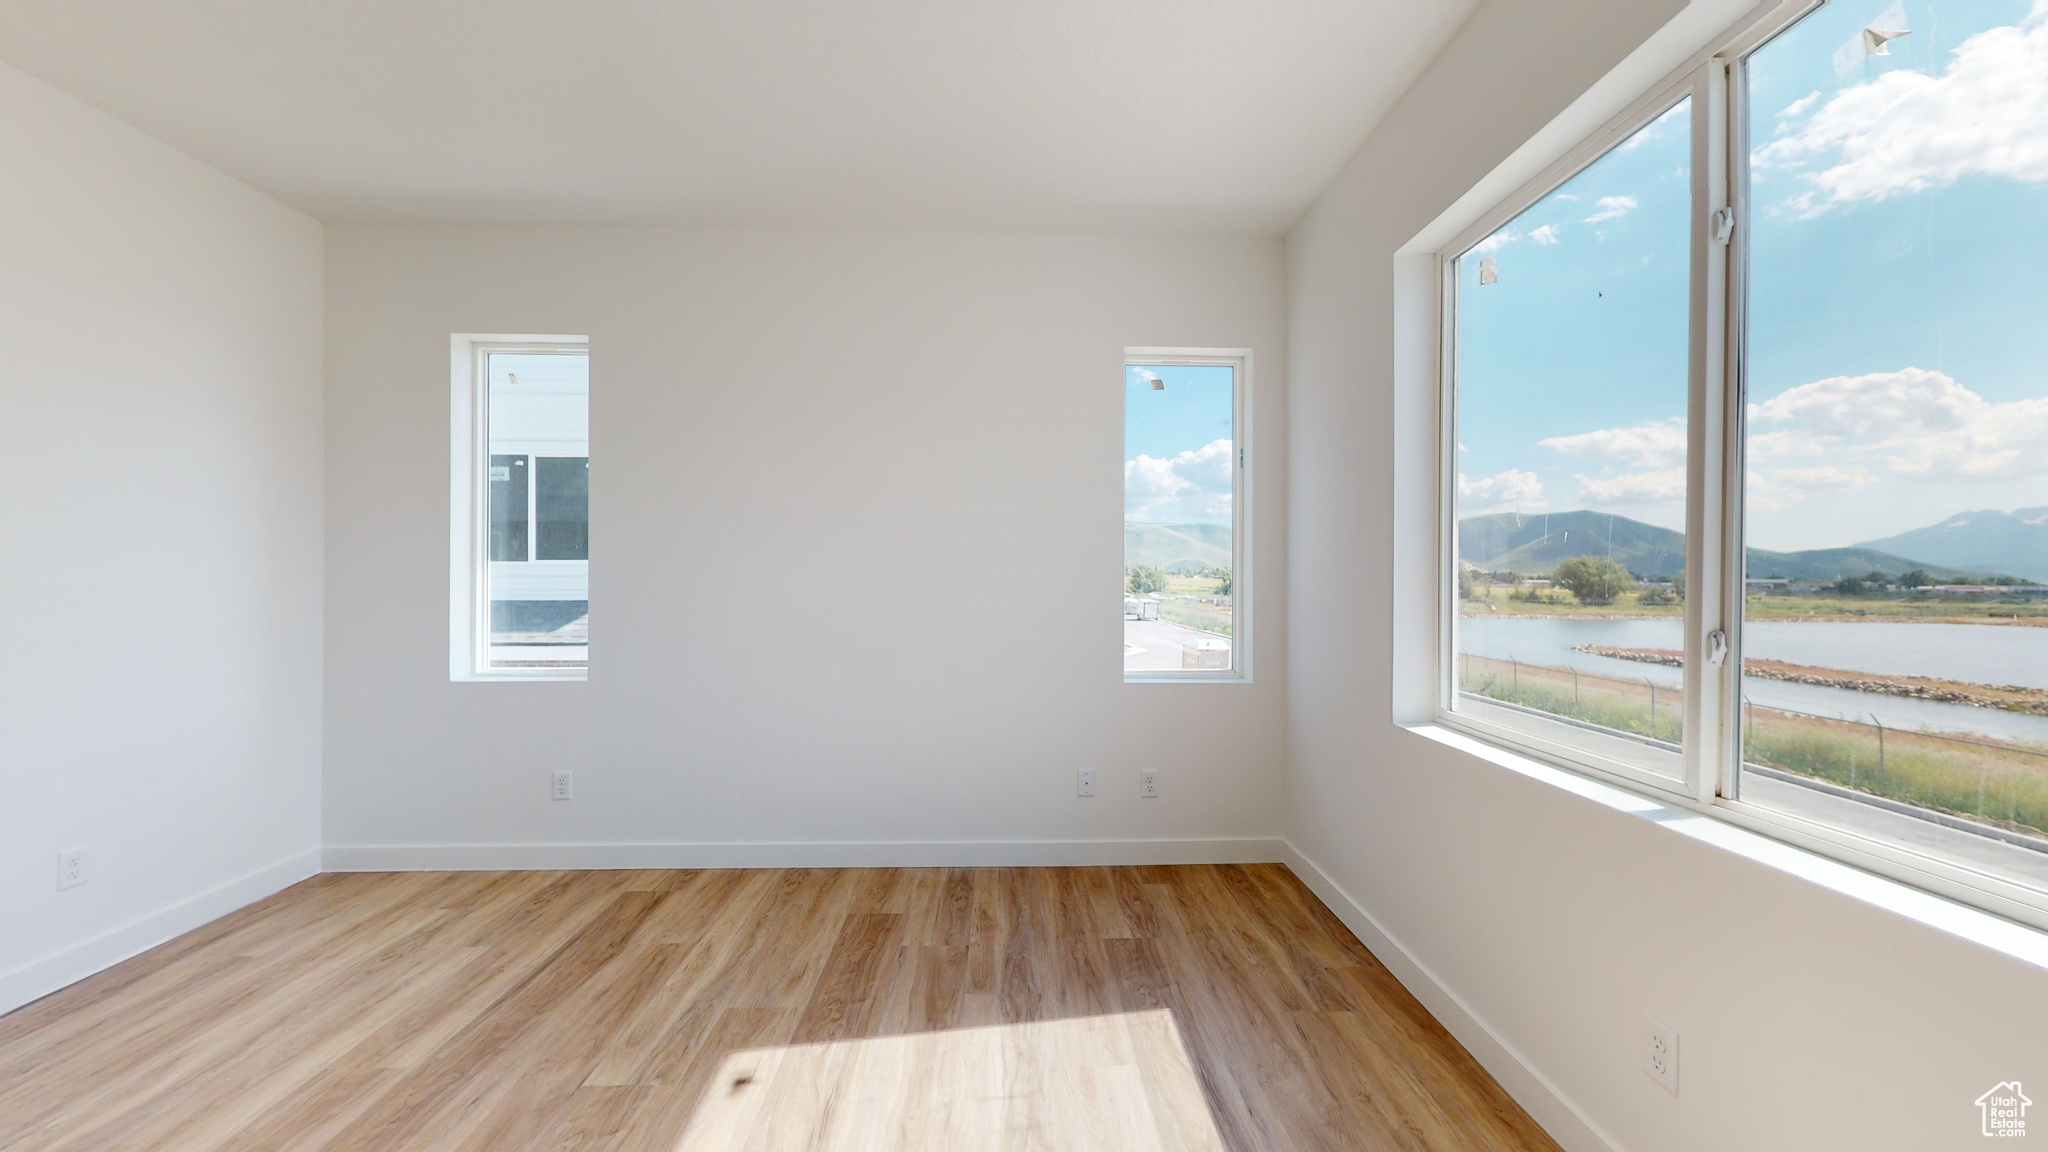 Unfurnished room with a water and mountain view and light wood-type flooring